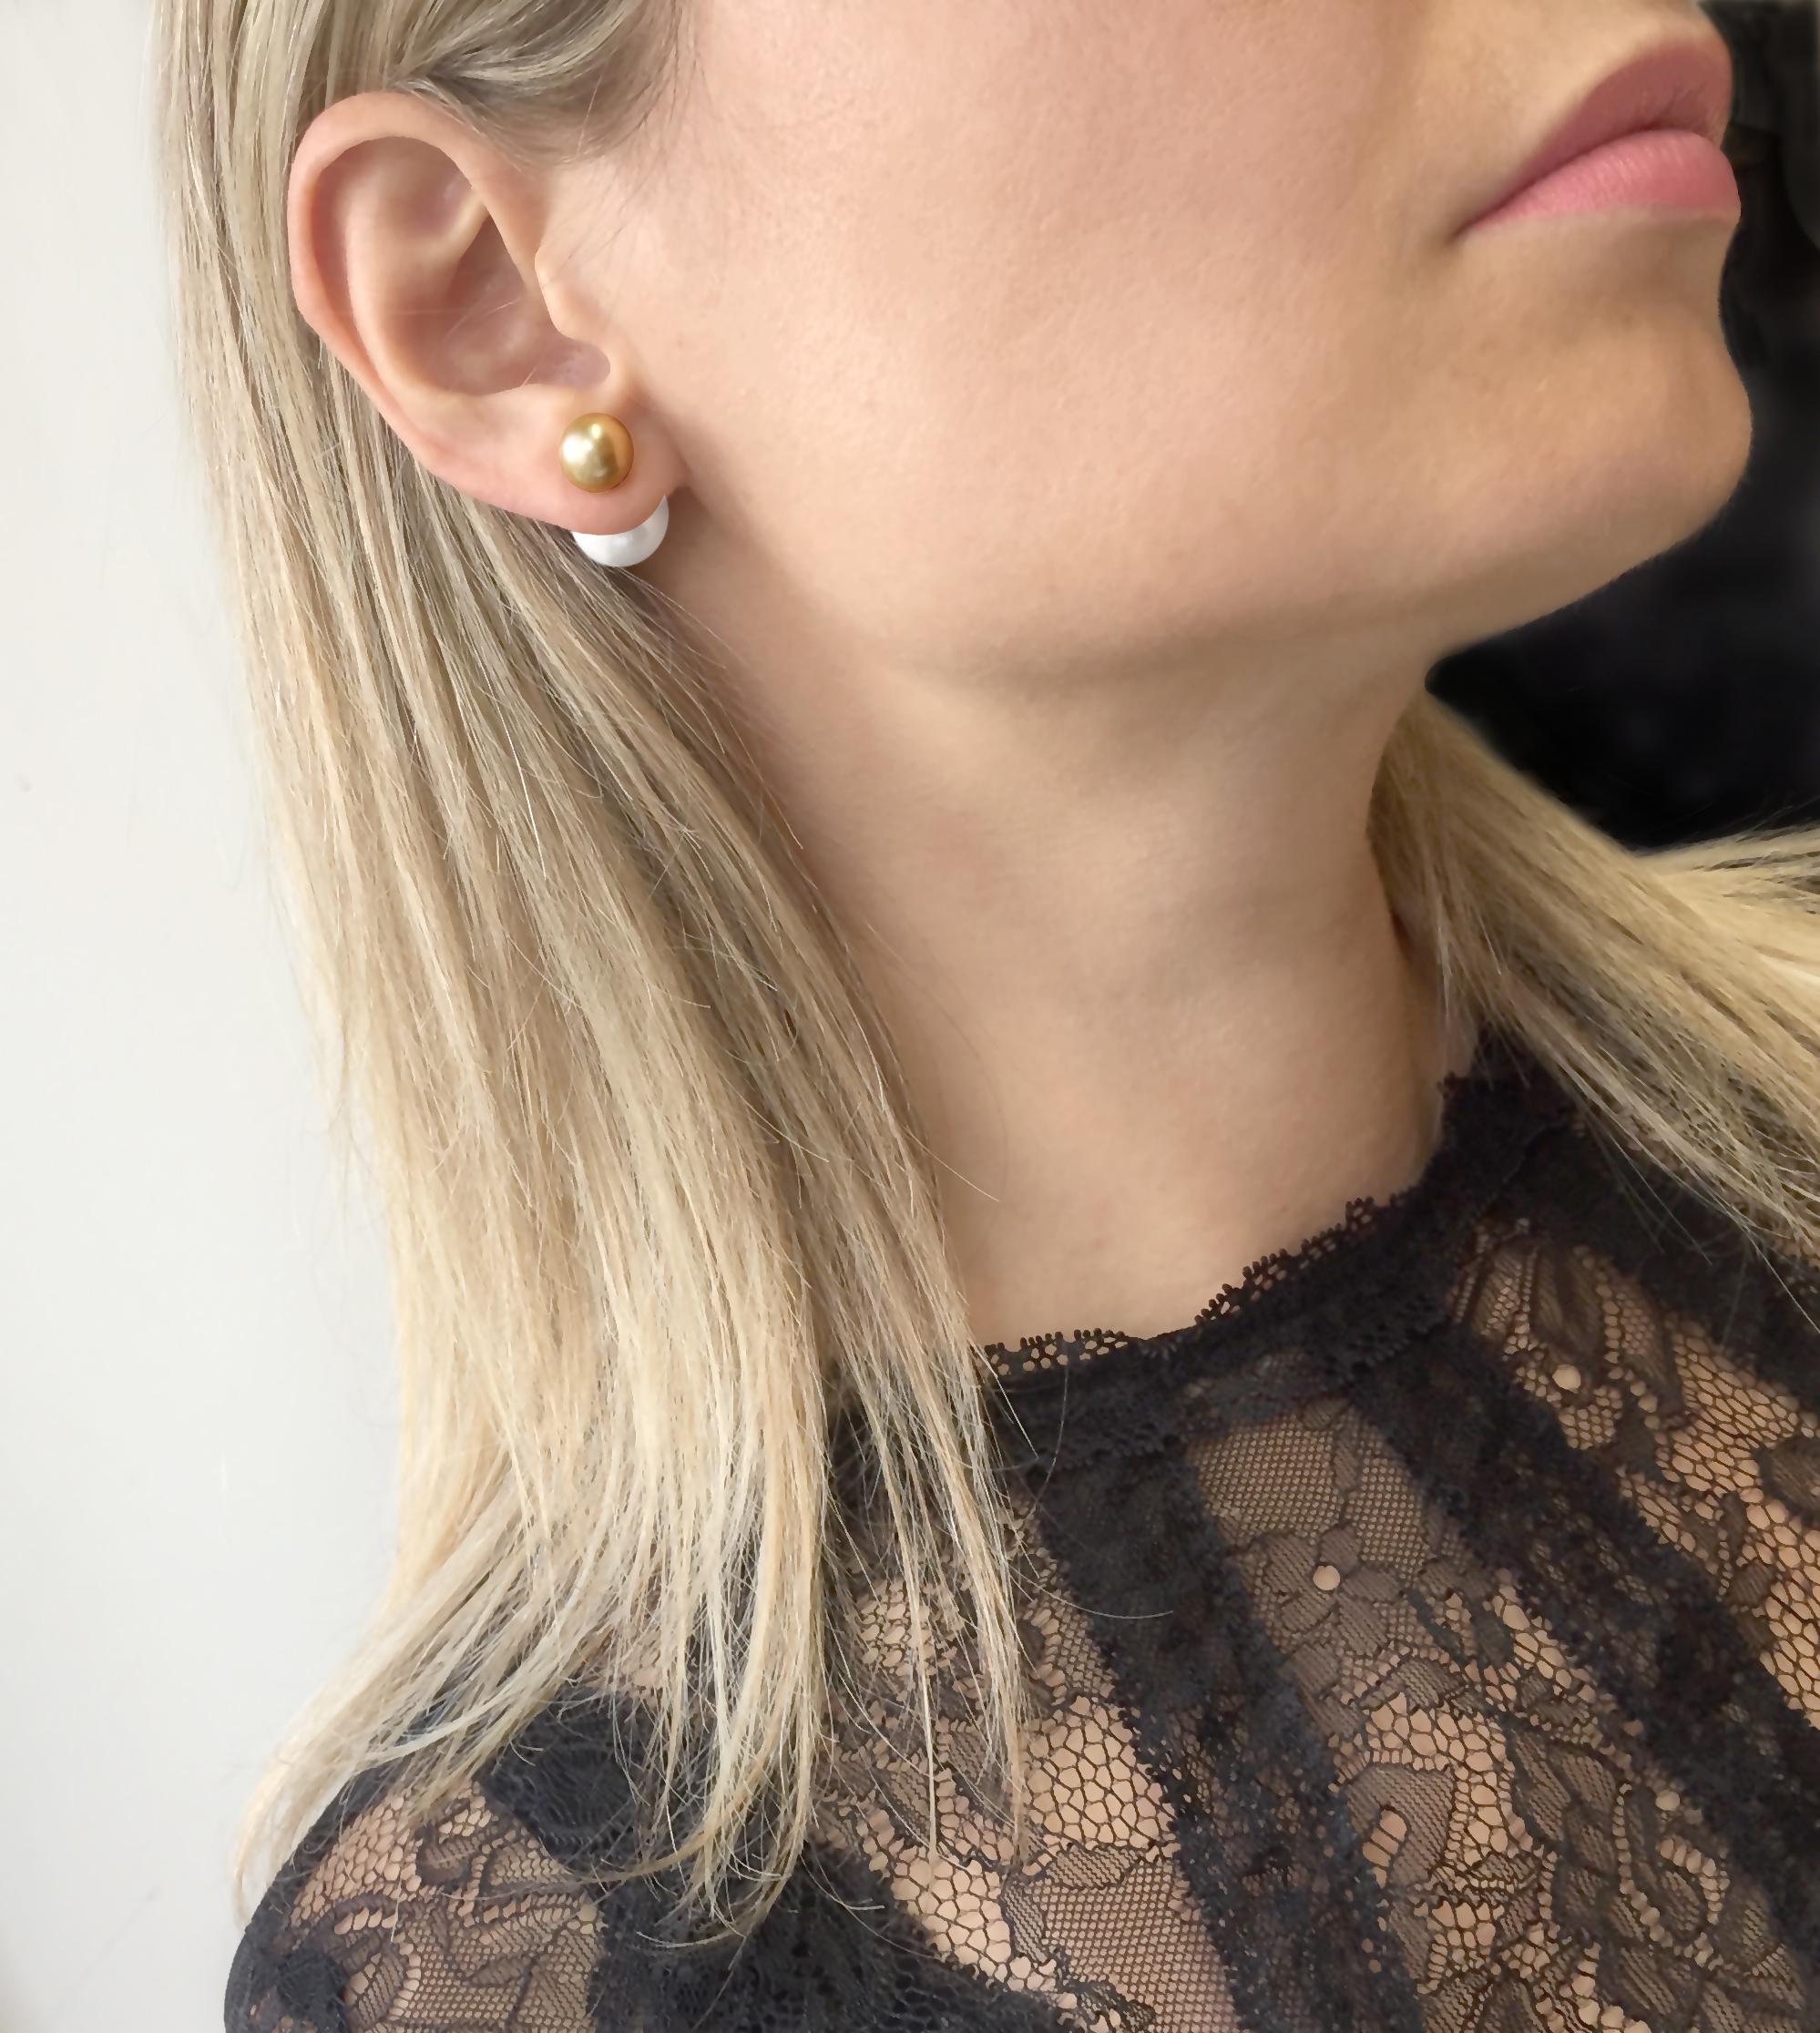 The pairing of Australian South Sea pearls alongside rare Golden South Sea pearls makes for a striking combination in these stylish earrings by Yoko London.
The simple elegance of these earrings makes them extremely versatile; perfect for the modern